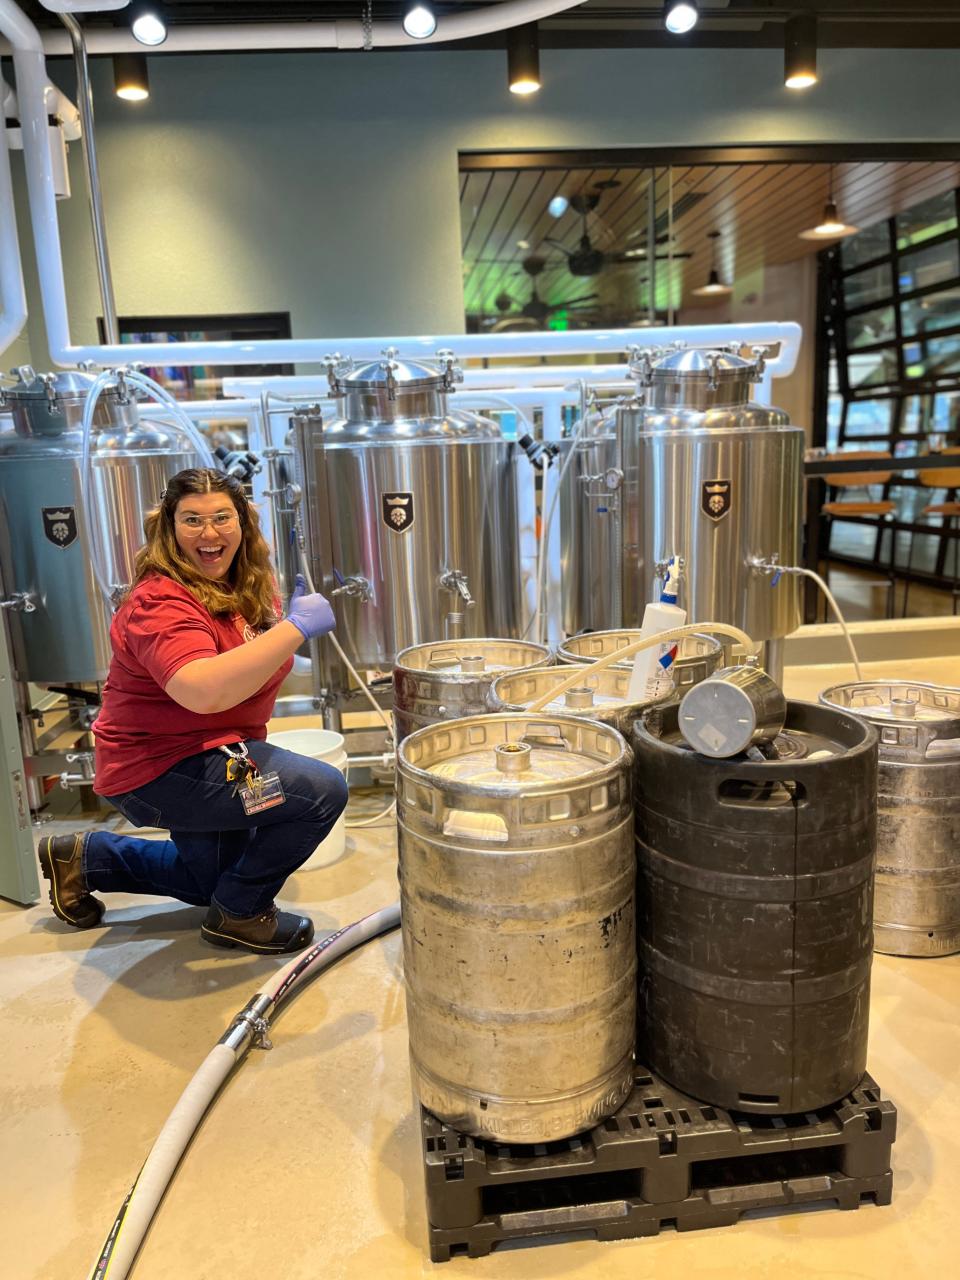 Corrine Georges brews beer in J. Leinenkugel's Barrel Yard at American Family Field. Georges is the pilot brewery's first and only brewer on-site. Her first two beers, Lead off Lager and Double Play IPA, are available at the Barrel Yard daily.